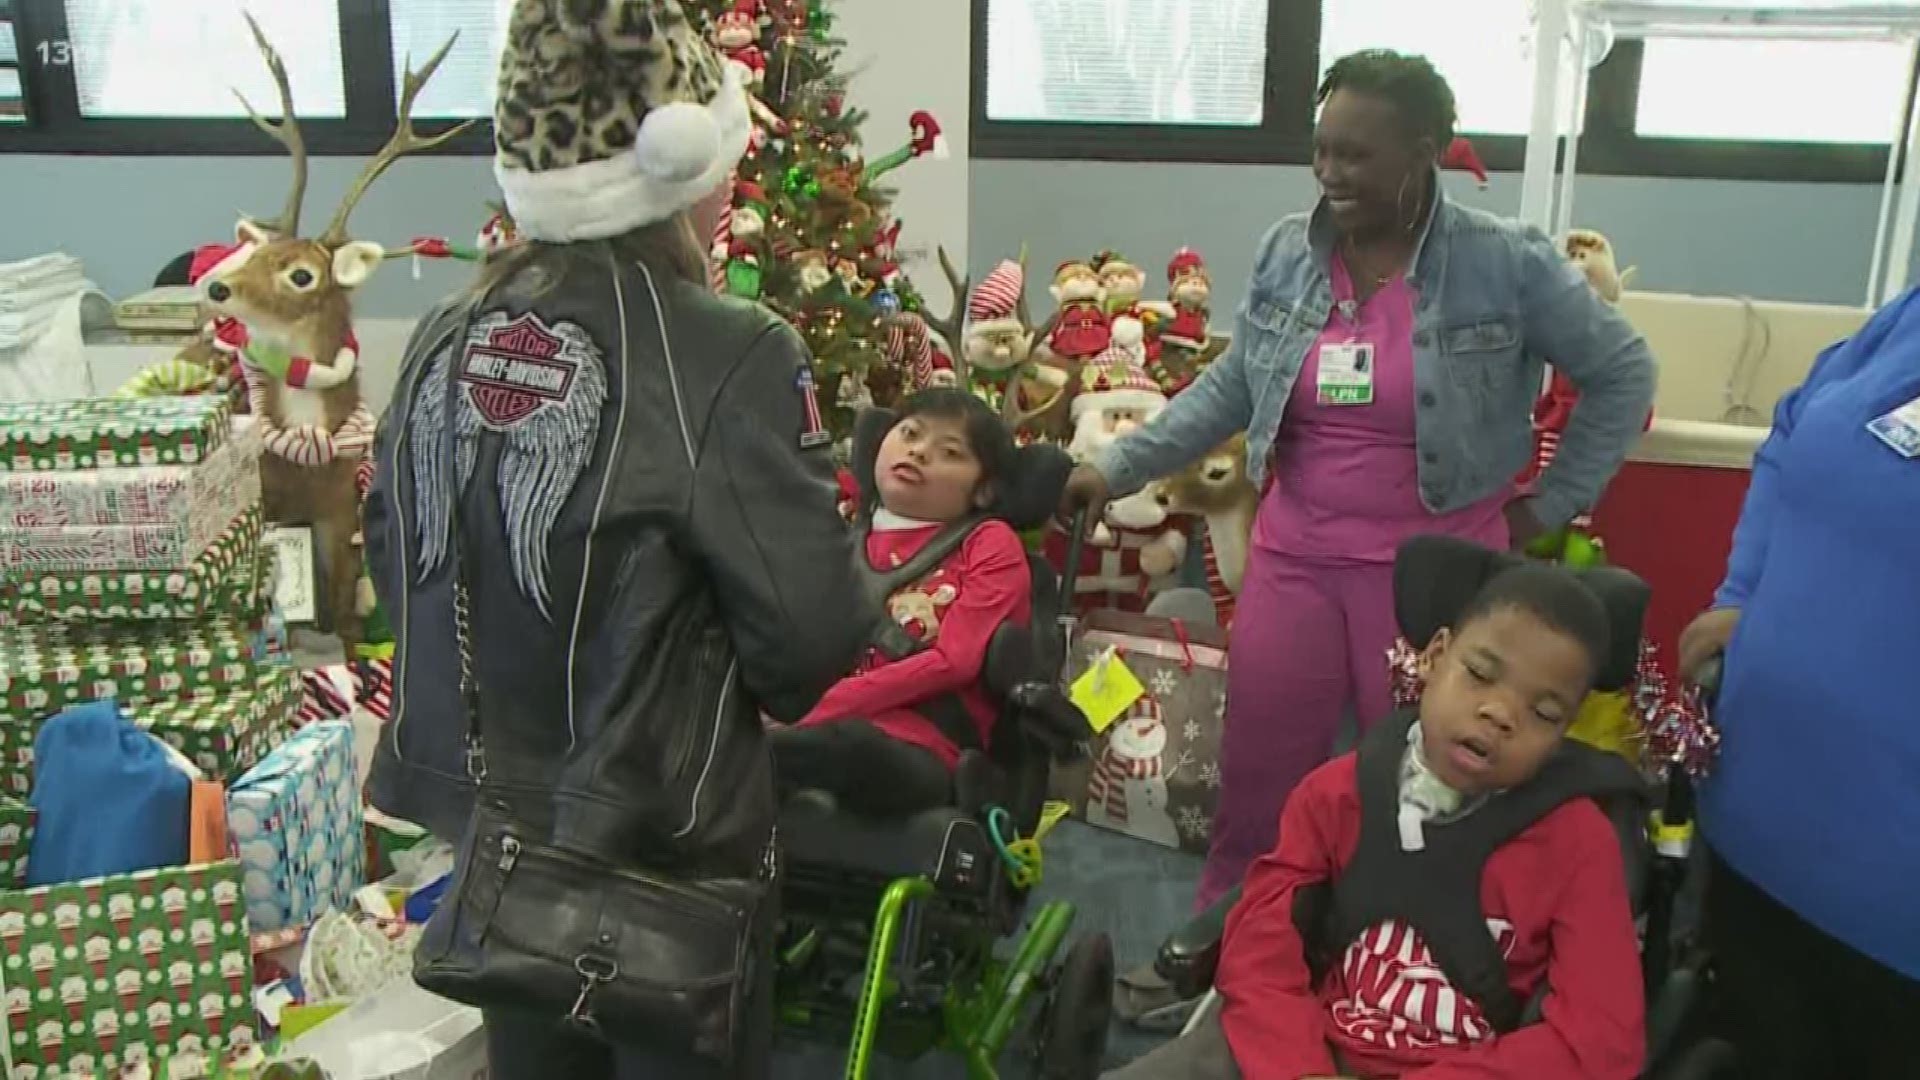 Motorcyclists hopped on their rides at Virginia Beach’s Southside Harley-Davidson and cruised to Lake Taylor Transitional Care Hospital with gifts in tow.